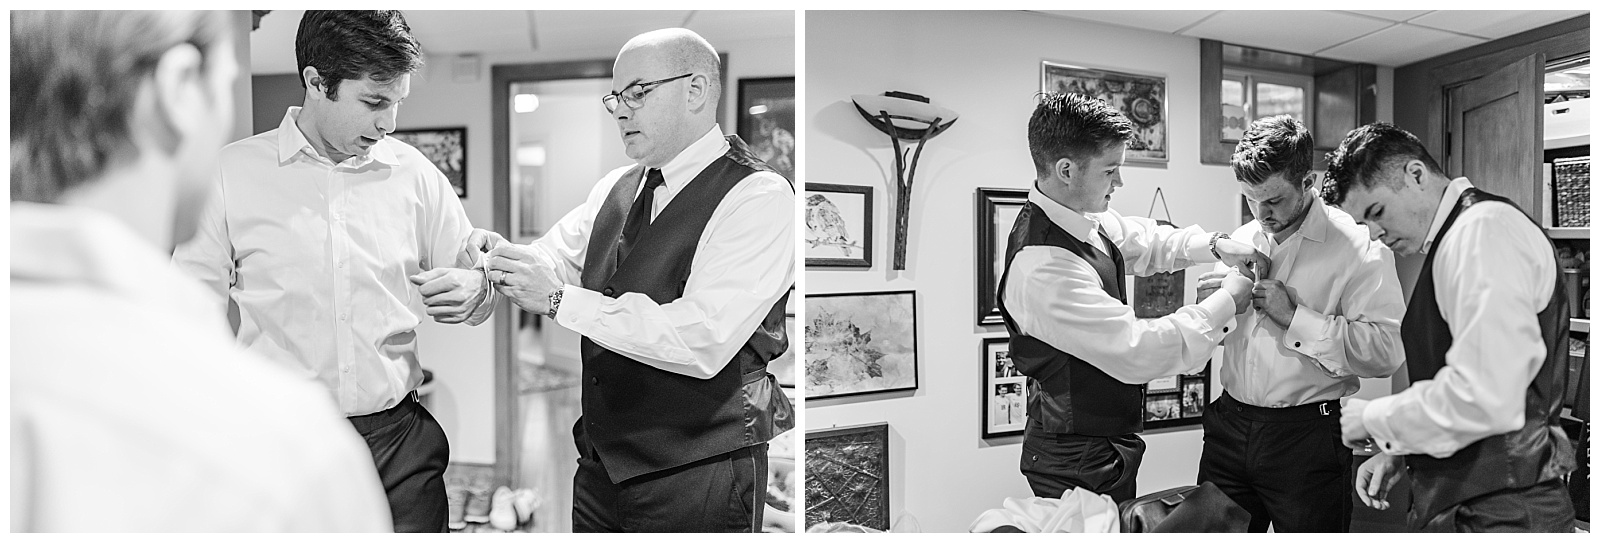 groom gets ready with his father at intimate home wedding in west chester pa